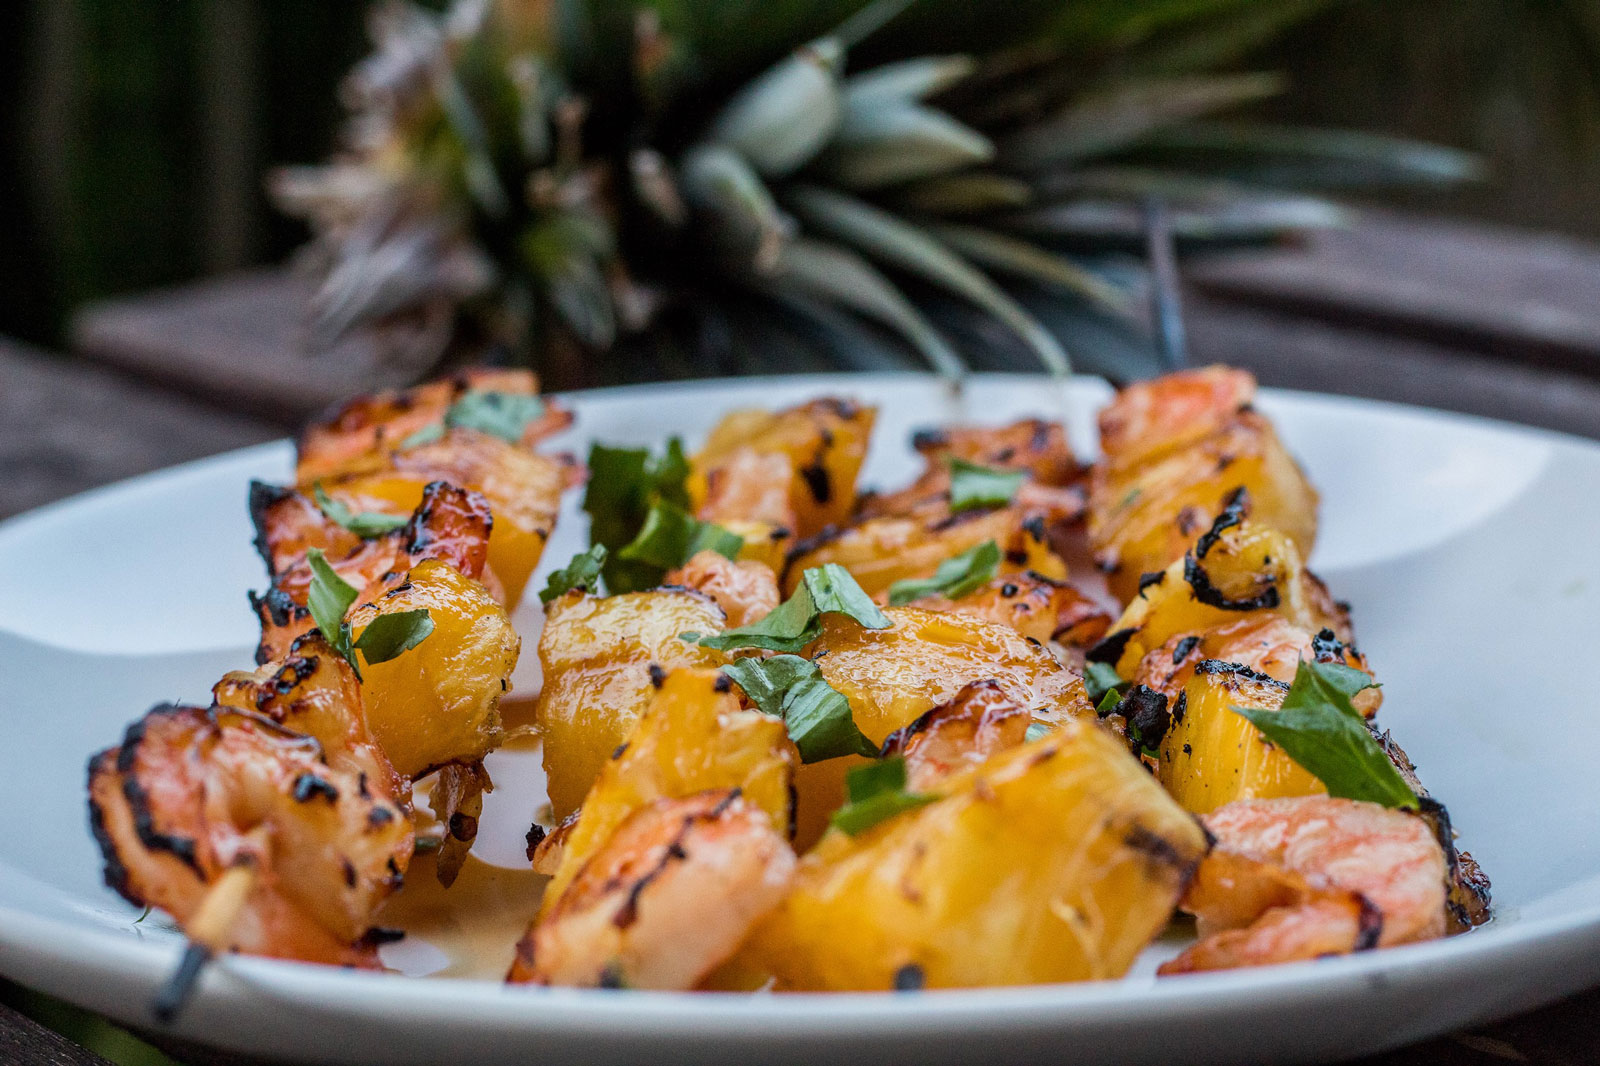 Make it a tropical night with grilled pineapple